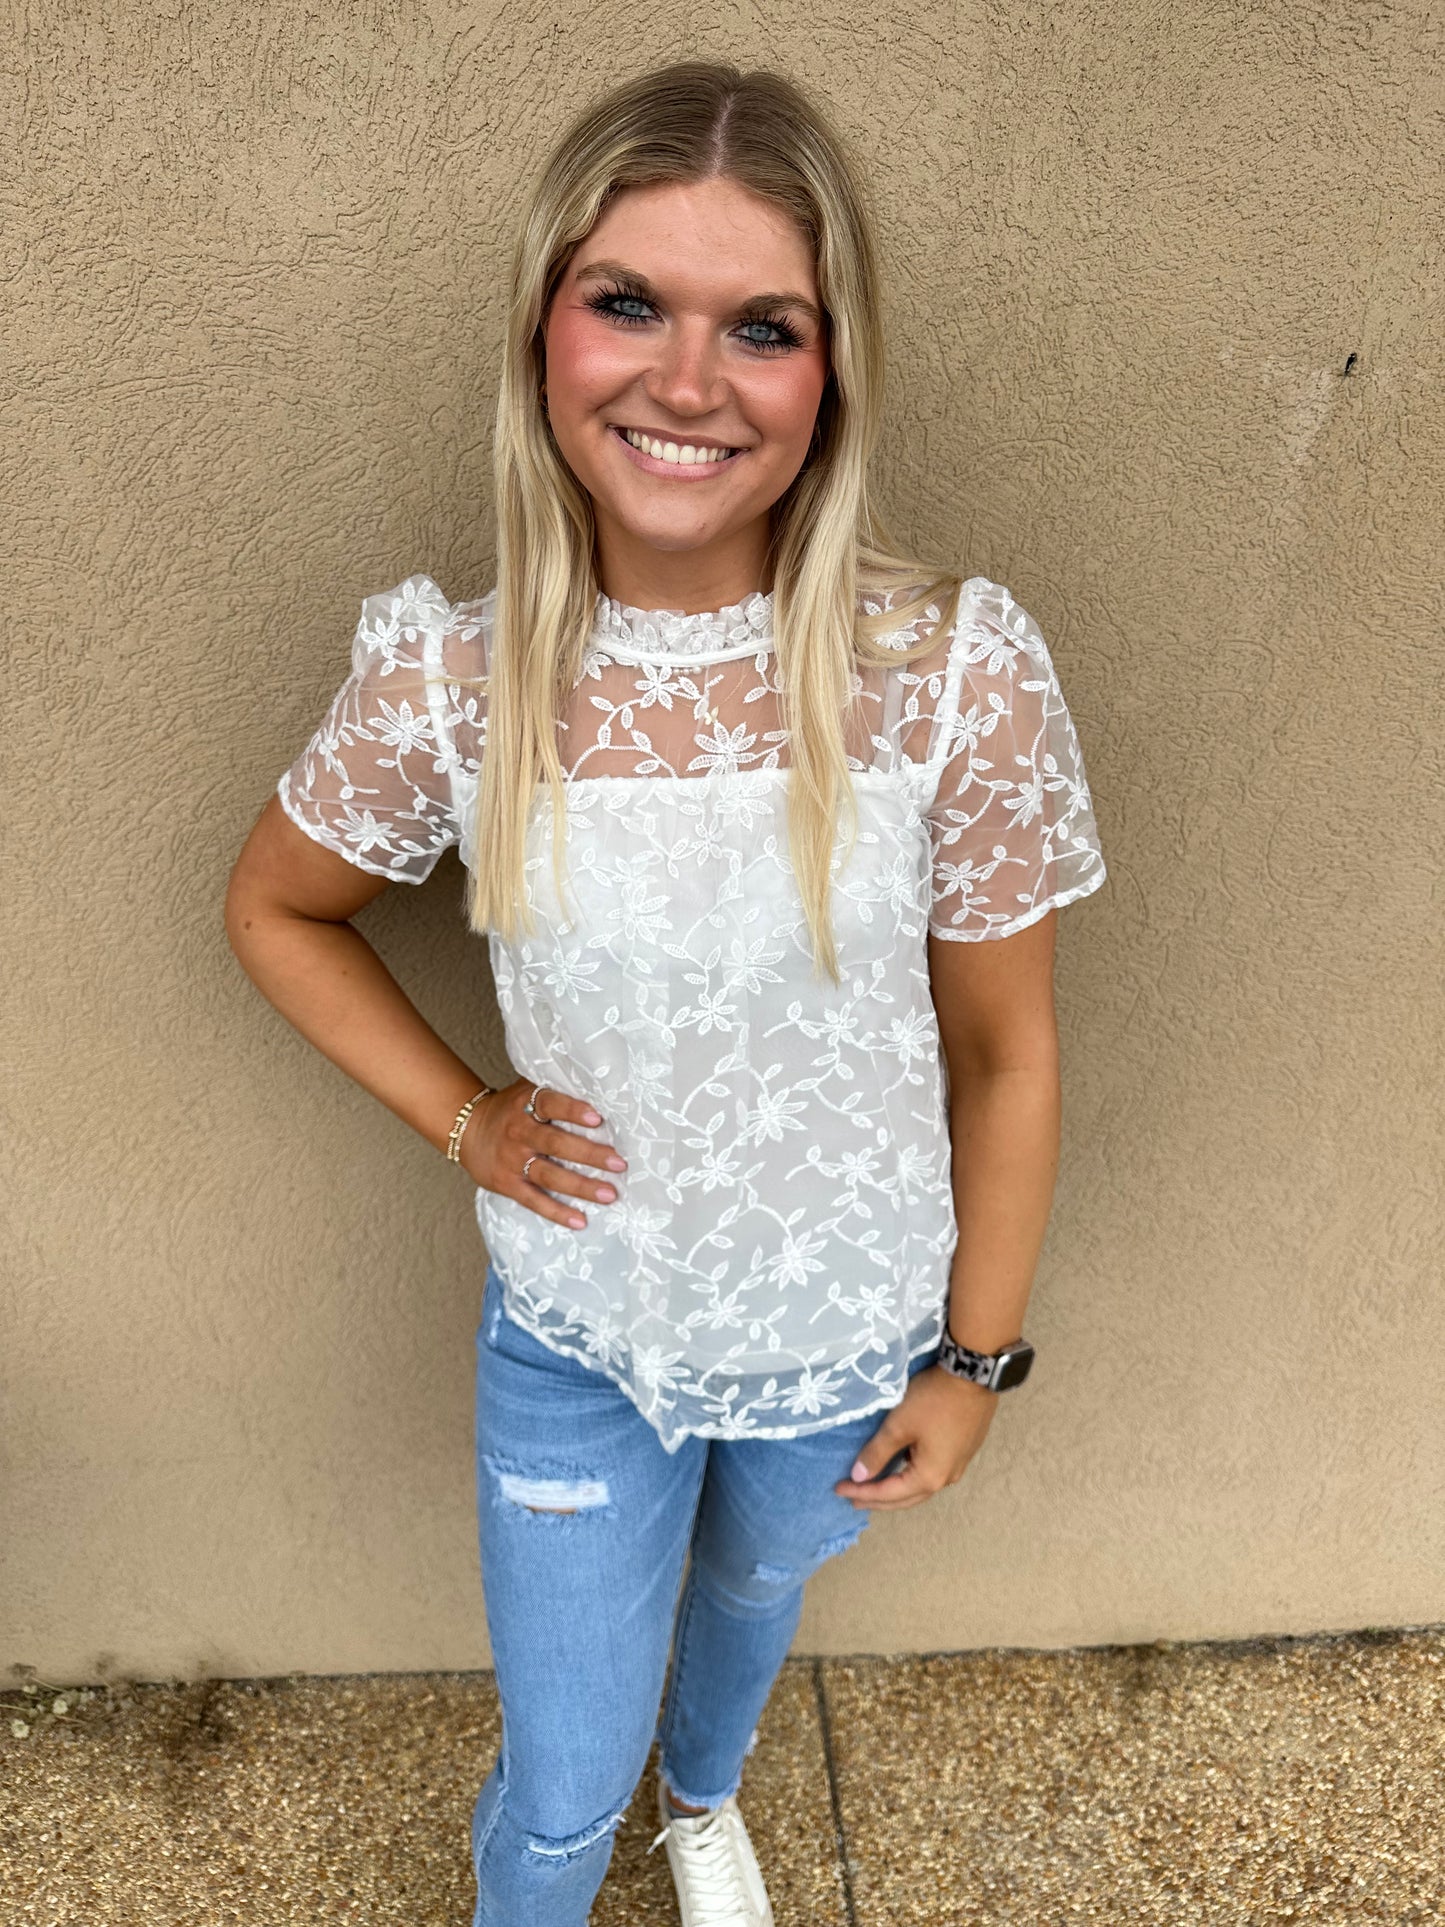 White lace puff sleeve top